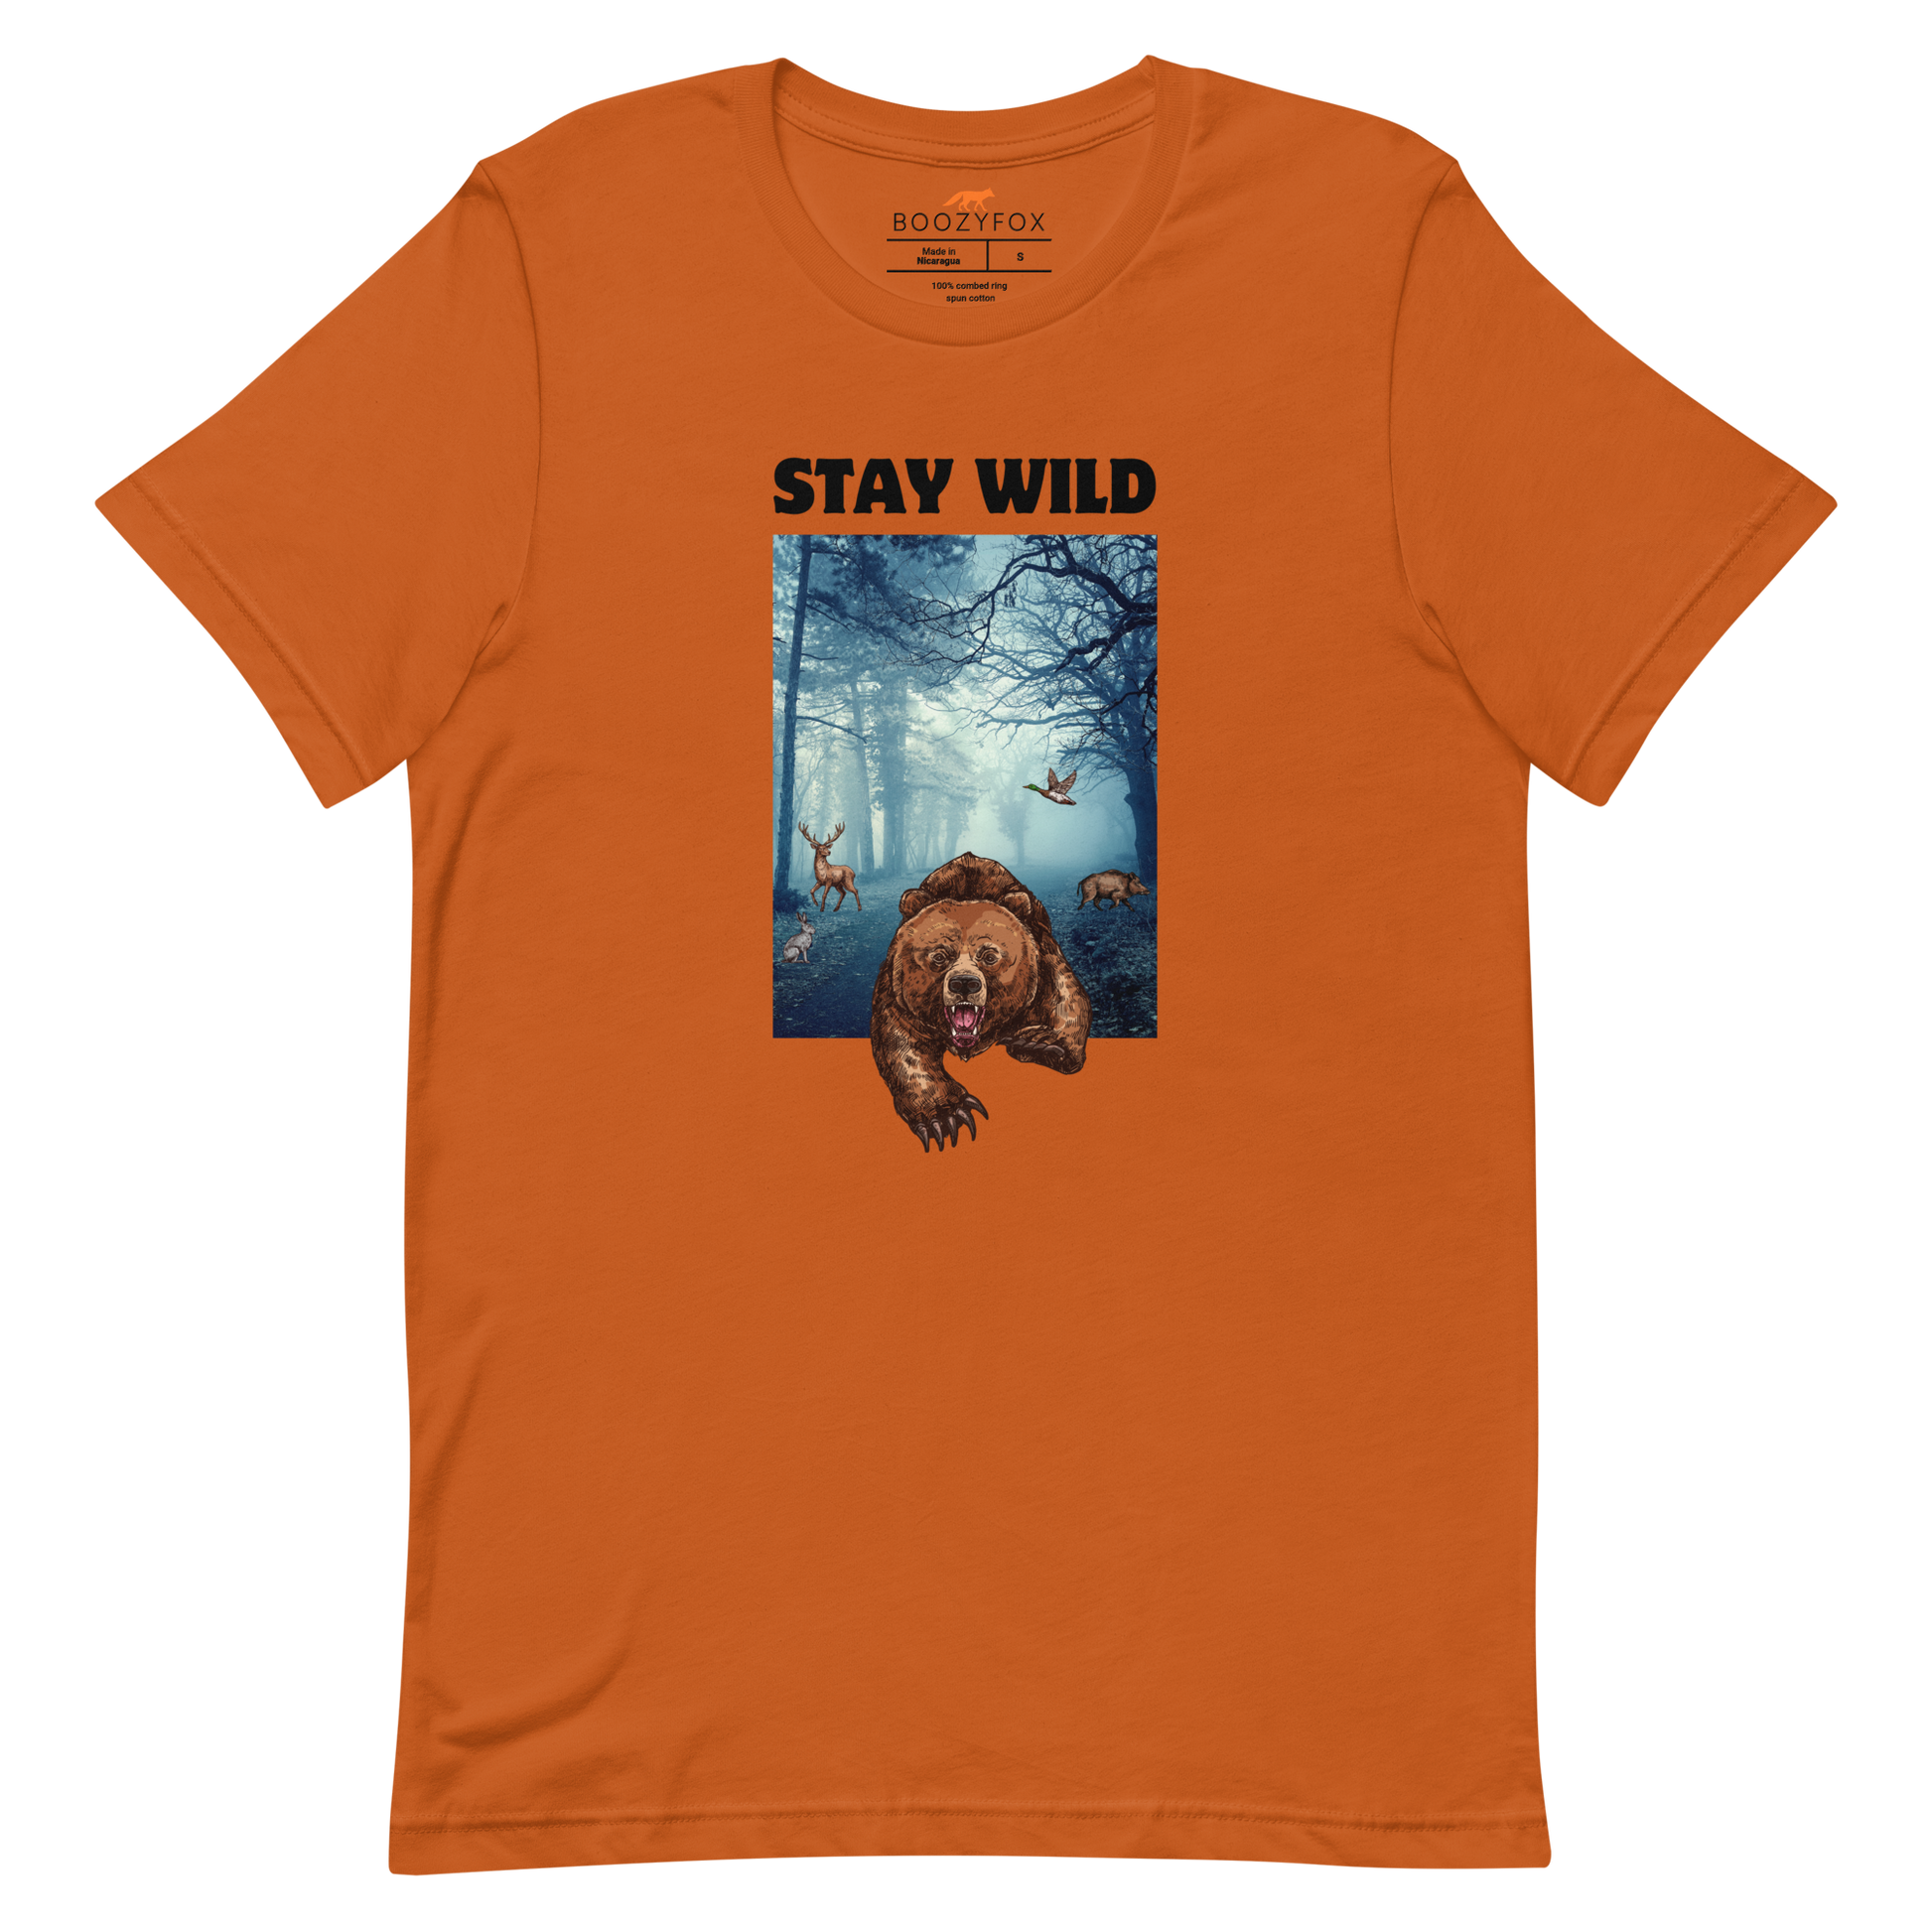 Autumn Colored Premium Bear Tee featuring a Stay Wild graphic on the chest - Cool Graphic Bear Tees - Boozy Fox